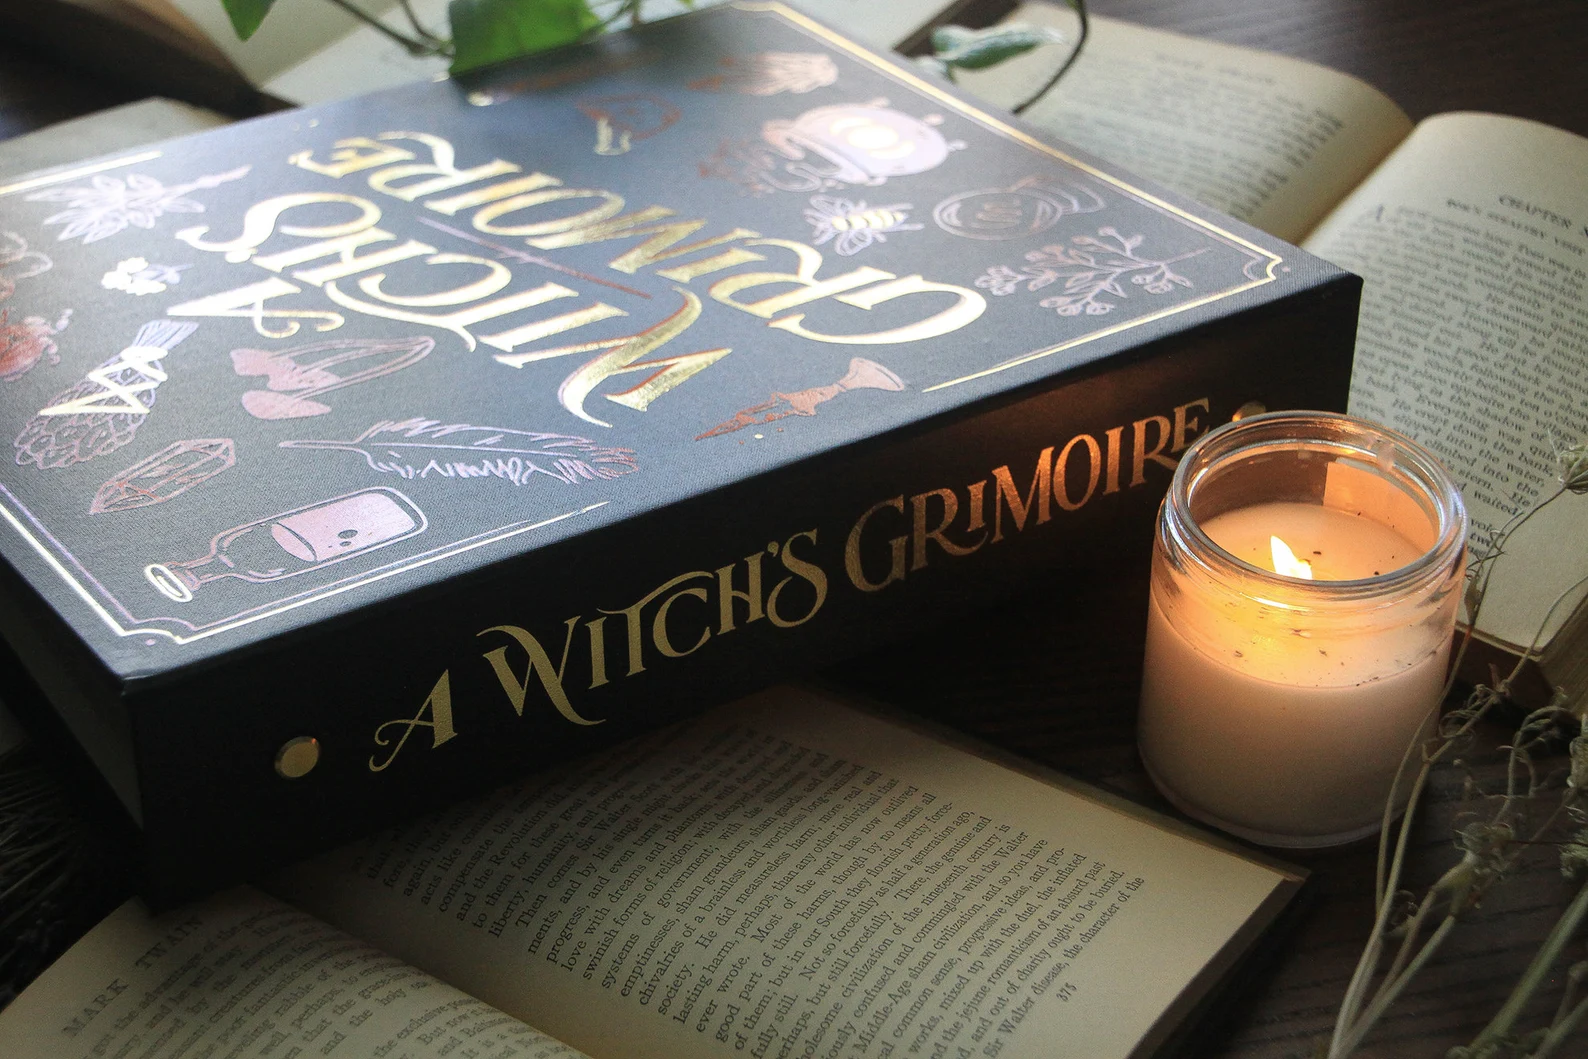 A witch's grimoire for recording spells, recipes, and rituals makes for an awesome witchy gift